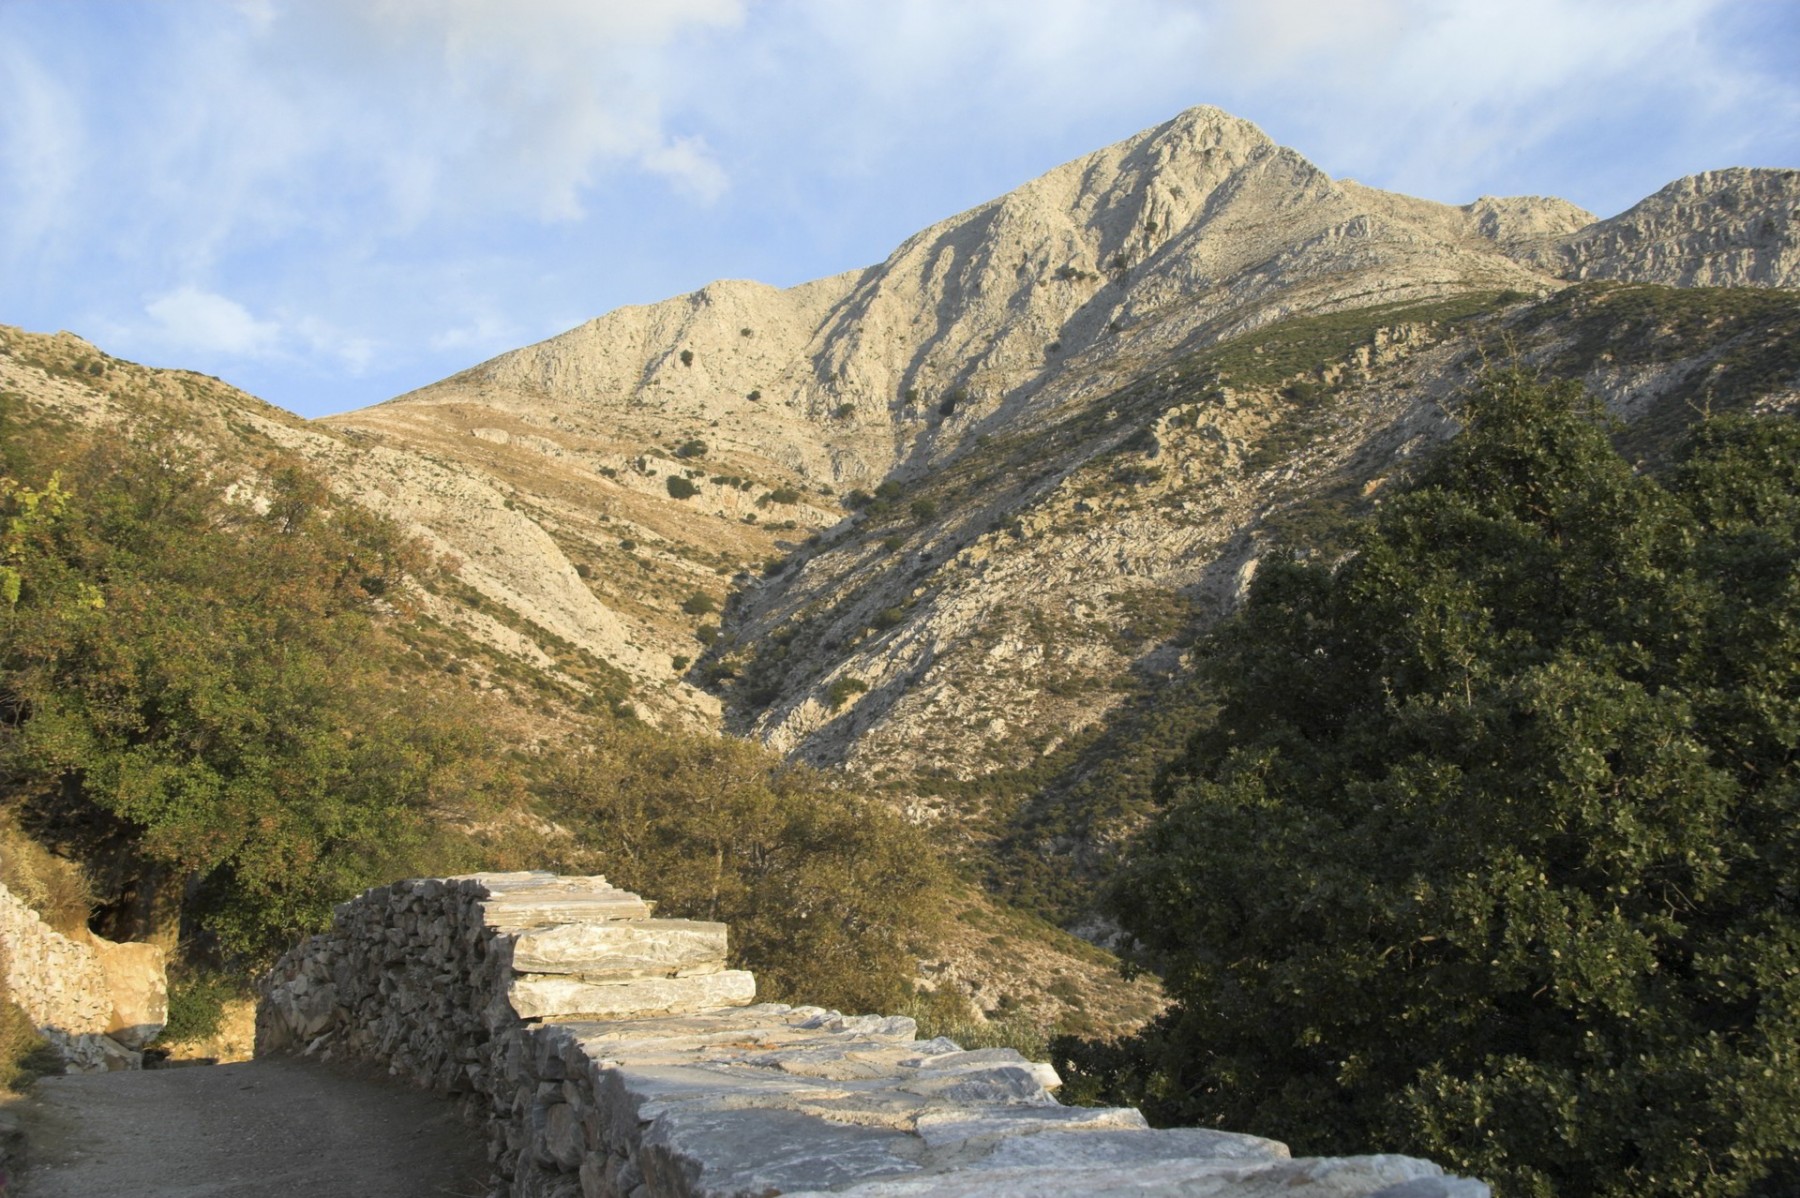 Mount Zas—highest peak of the Cyclades